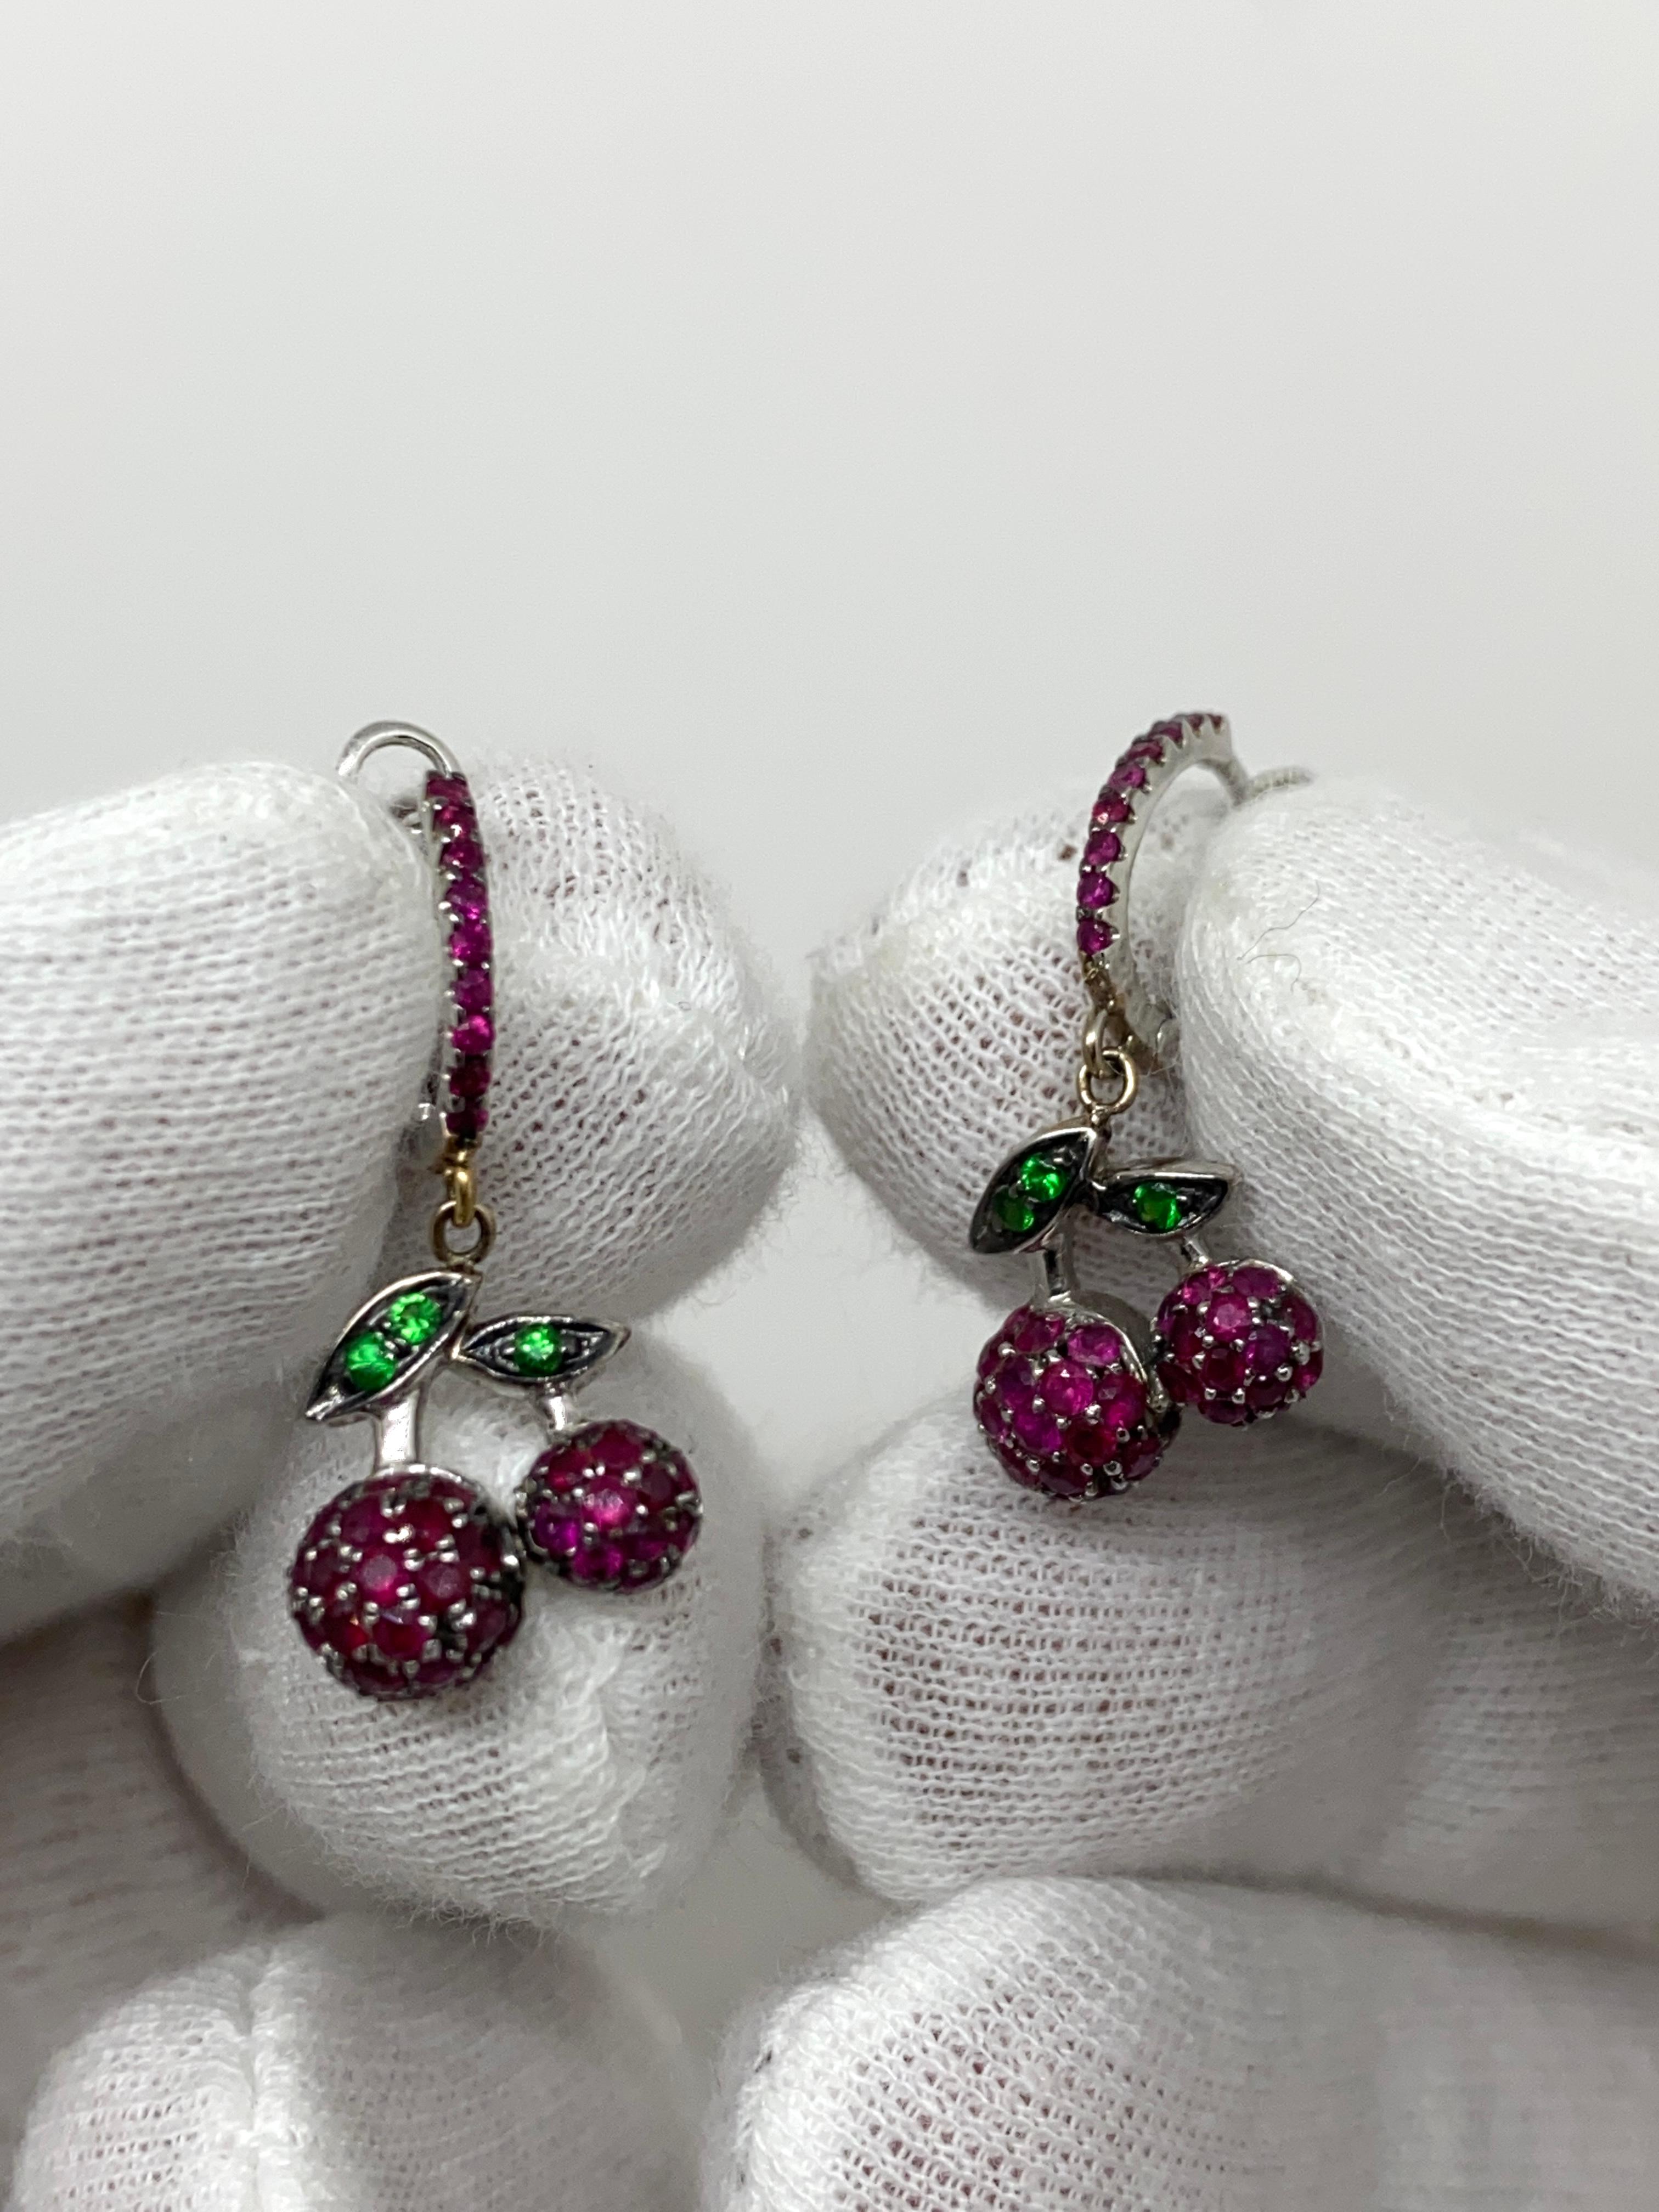 Drop earrings made of 18kt burnished white gold with natural brilliant-cut rubies and green tsavorite.

Welcome to our jewelry collection, where every piece tells a story of timeless elegance and unparalleled craftsmanship. As a family-run business